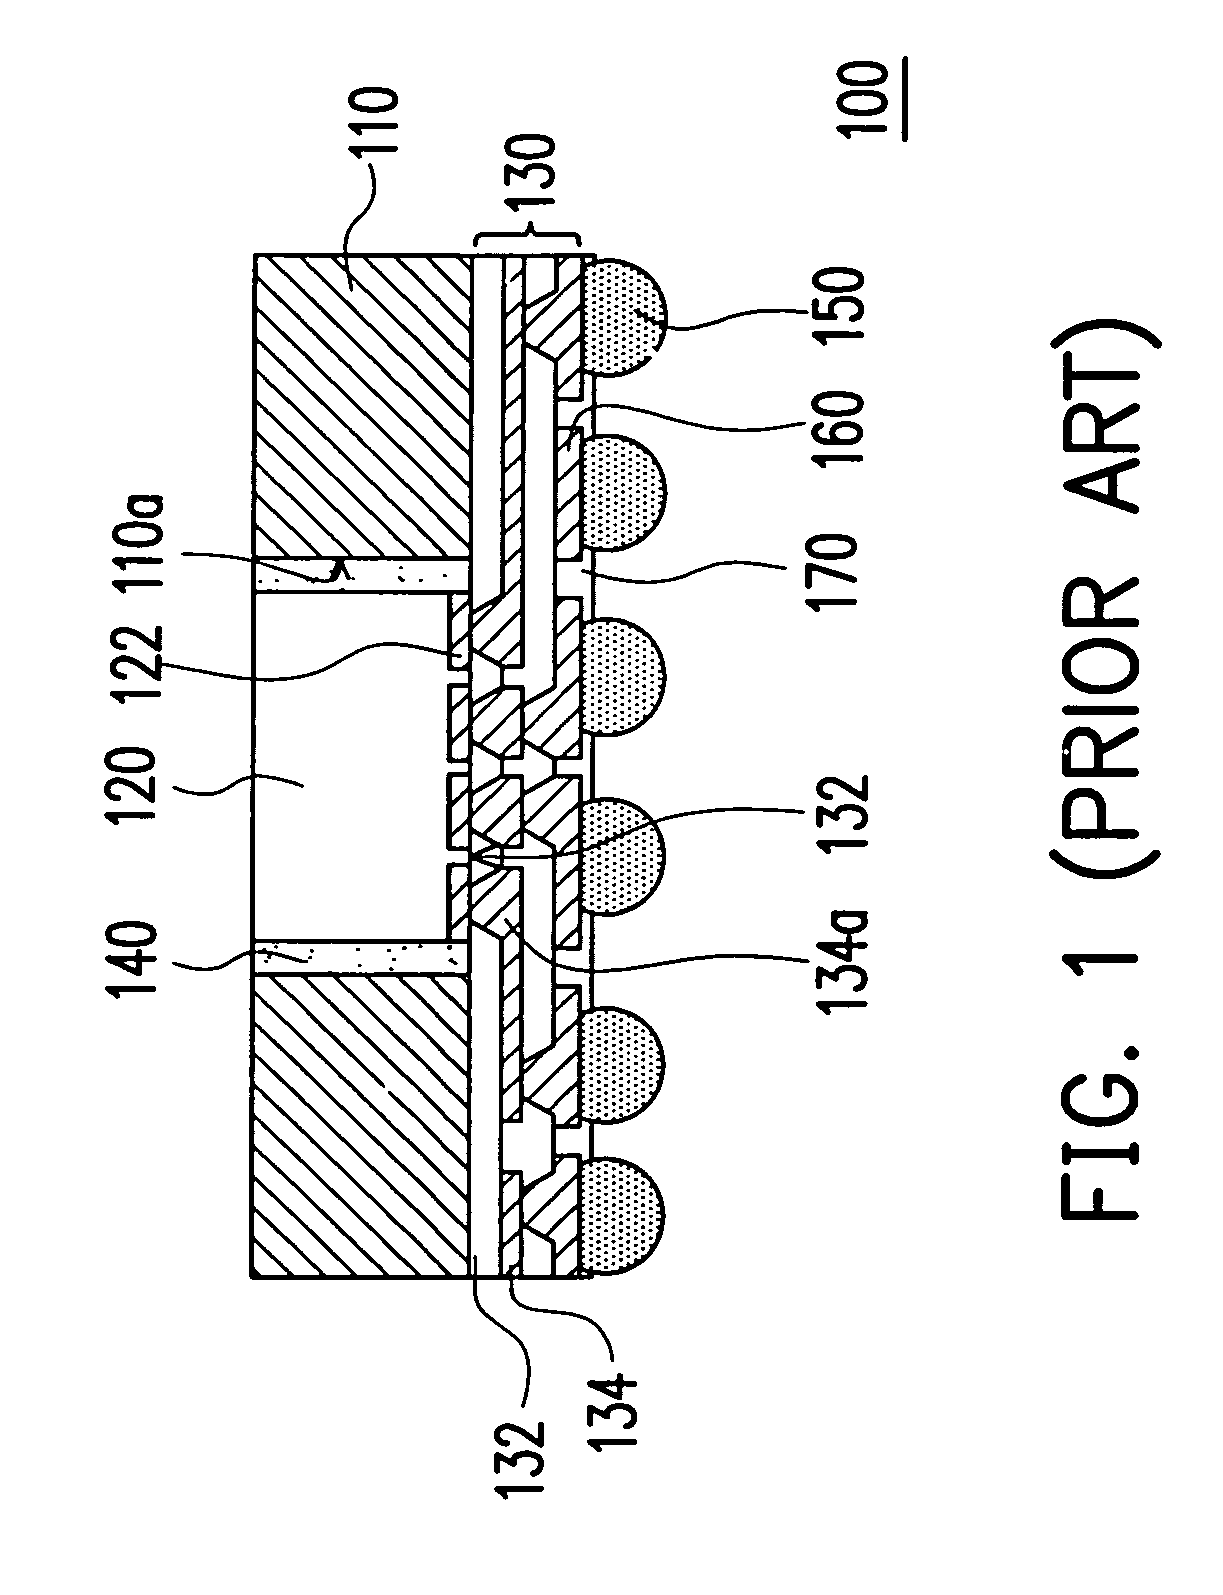 Chip package with embedded panel-shaped component